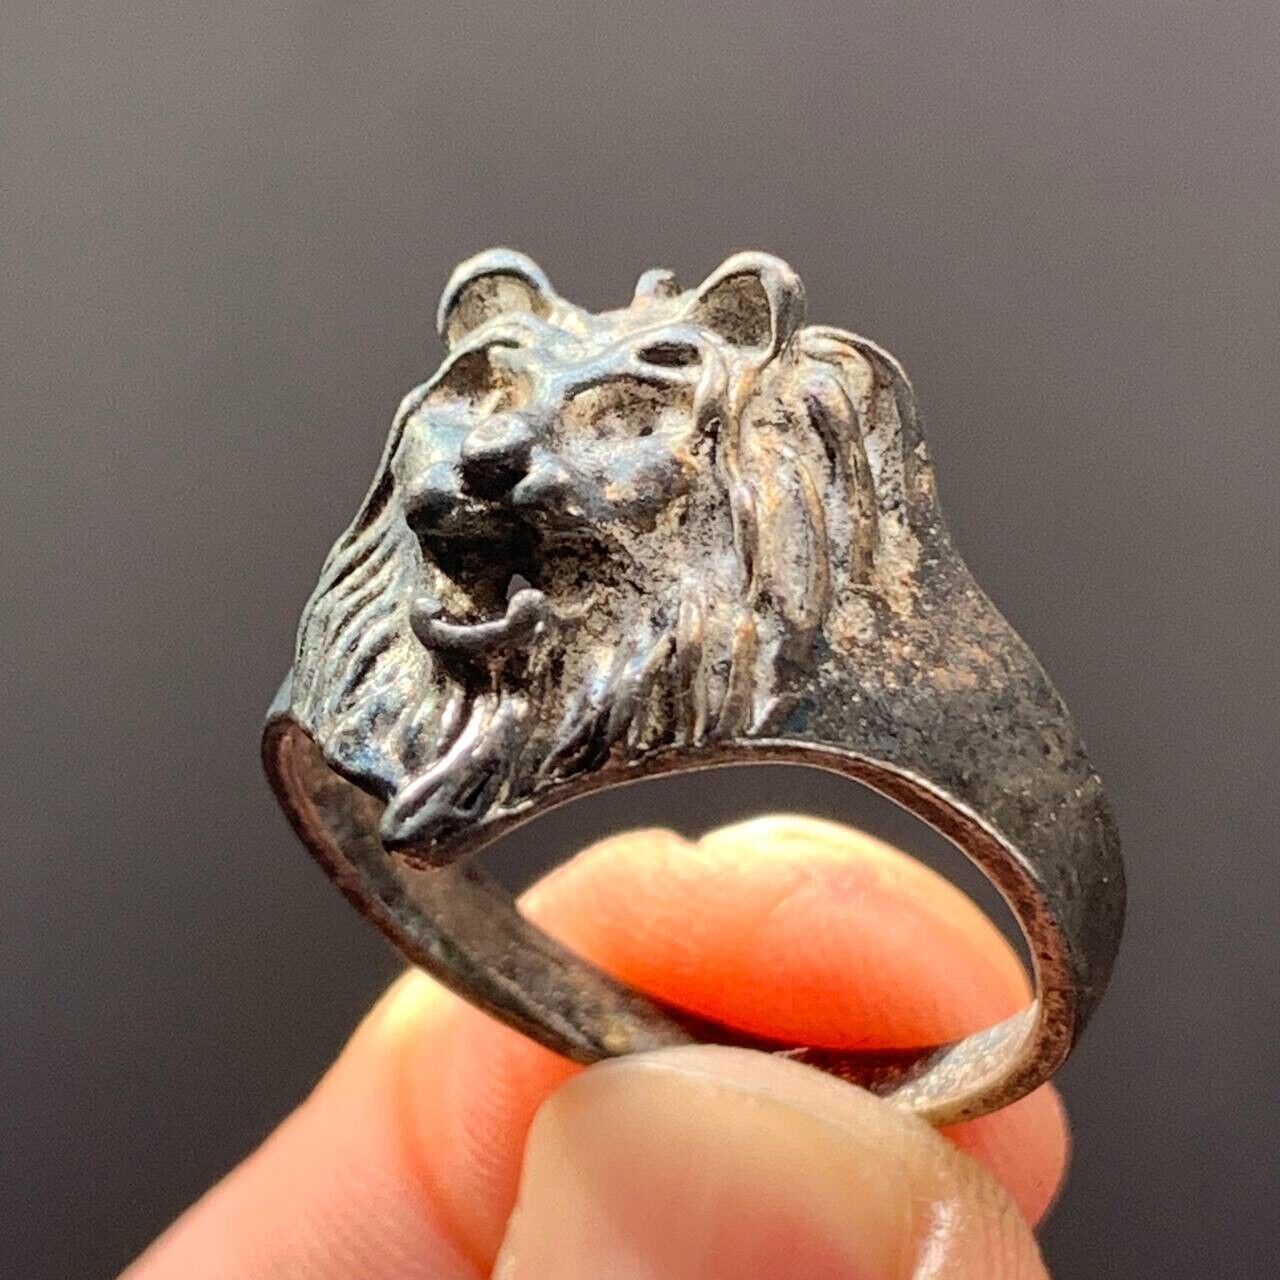 EXTREMELY ANCIENT BRONZE ANTIQUE VIKING RING LION HEAD-RING ARTIFACT VERY RARE